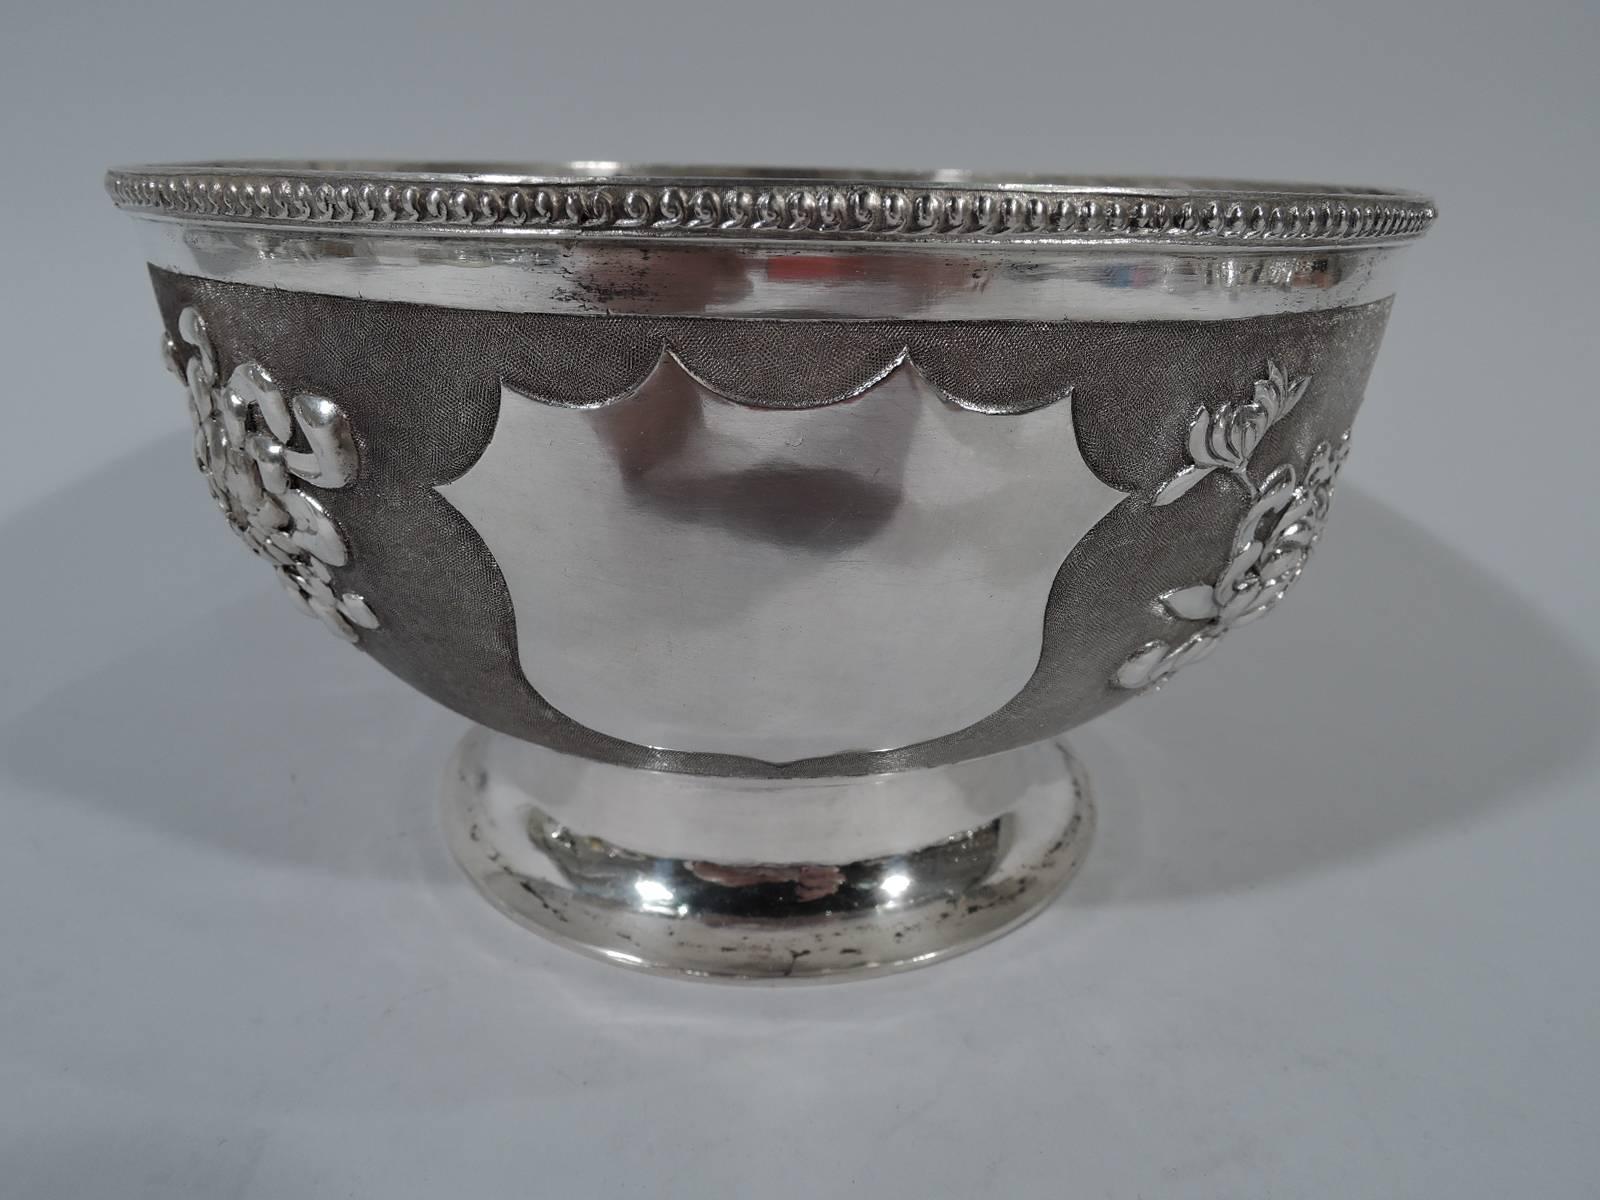 Beautiful Chinese export silver bowl, circa 1900. Curved sides and raised spread foot. Raised and naturalistic chrysanthemums on stippled ground and beaded rim. Foot plain. One circular frame and one armorial frame (both vacant). Marked with Chinese